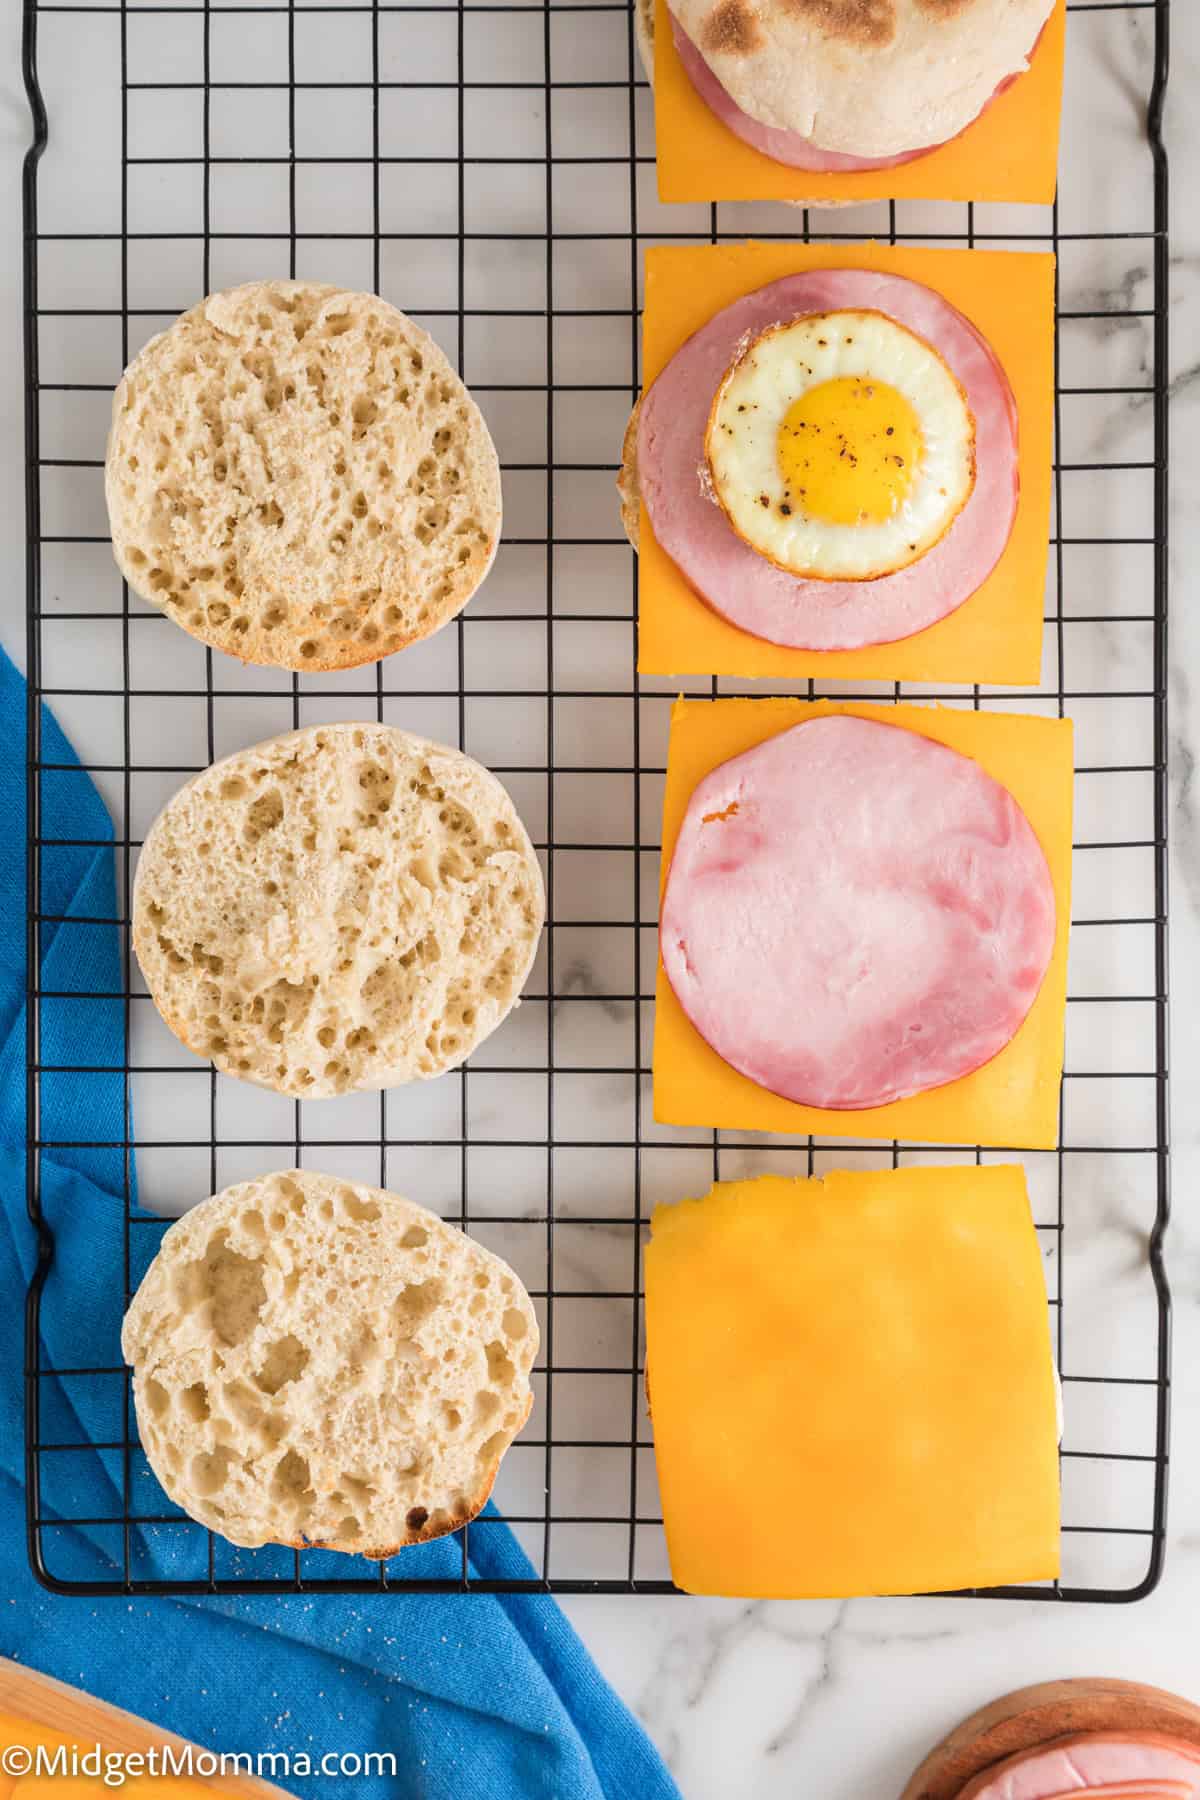 Four open-faced breakfast sandwiches are arranged on a cooling rack. Each sandwich has one half topped with cheese, ham, and a fried egg, and the other half is a plain English muffin.